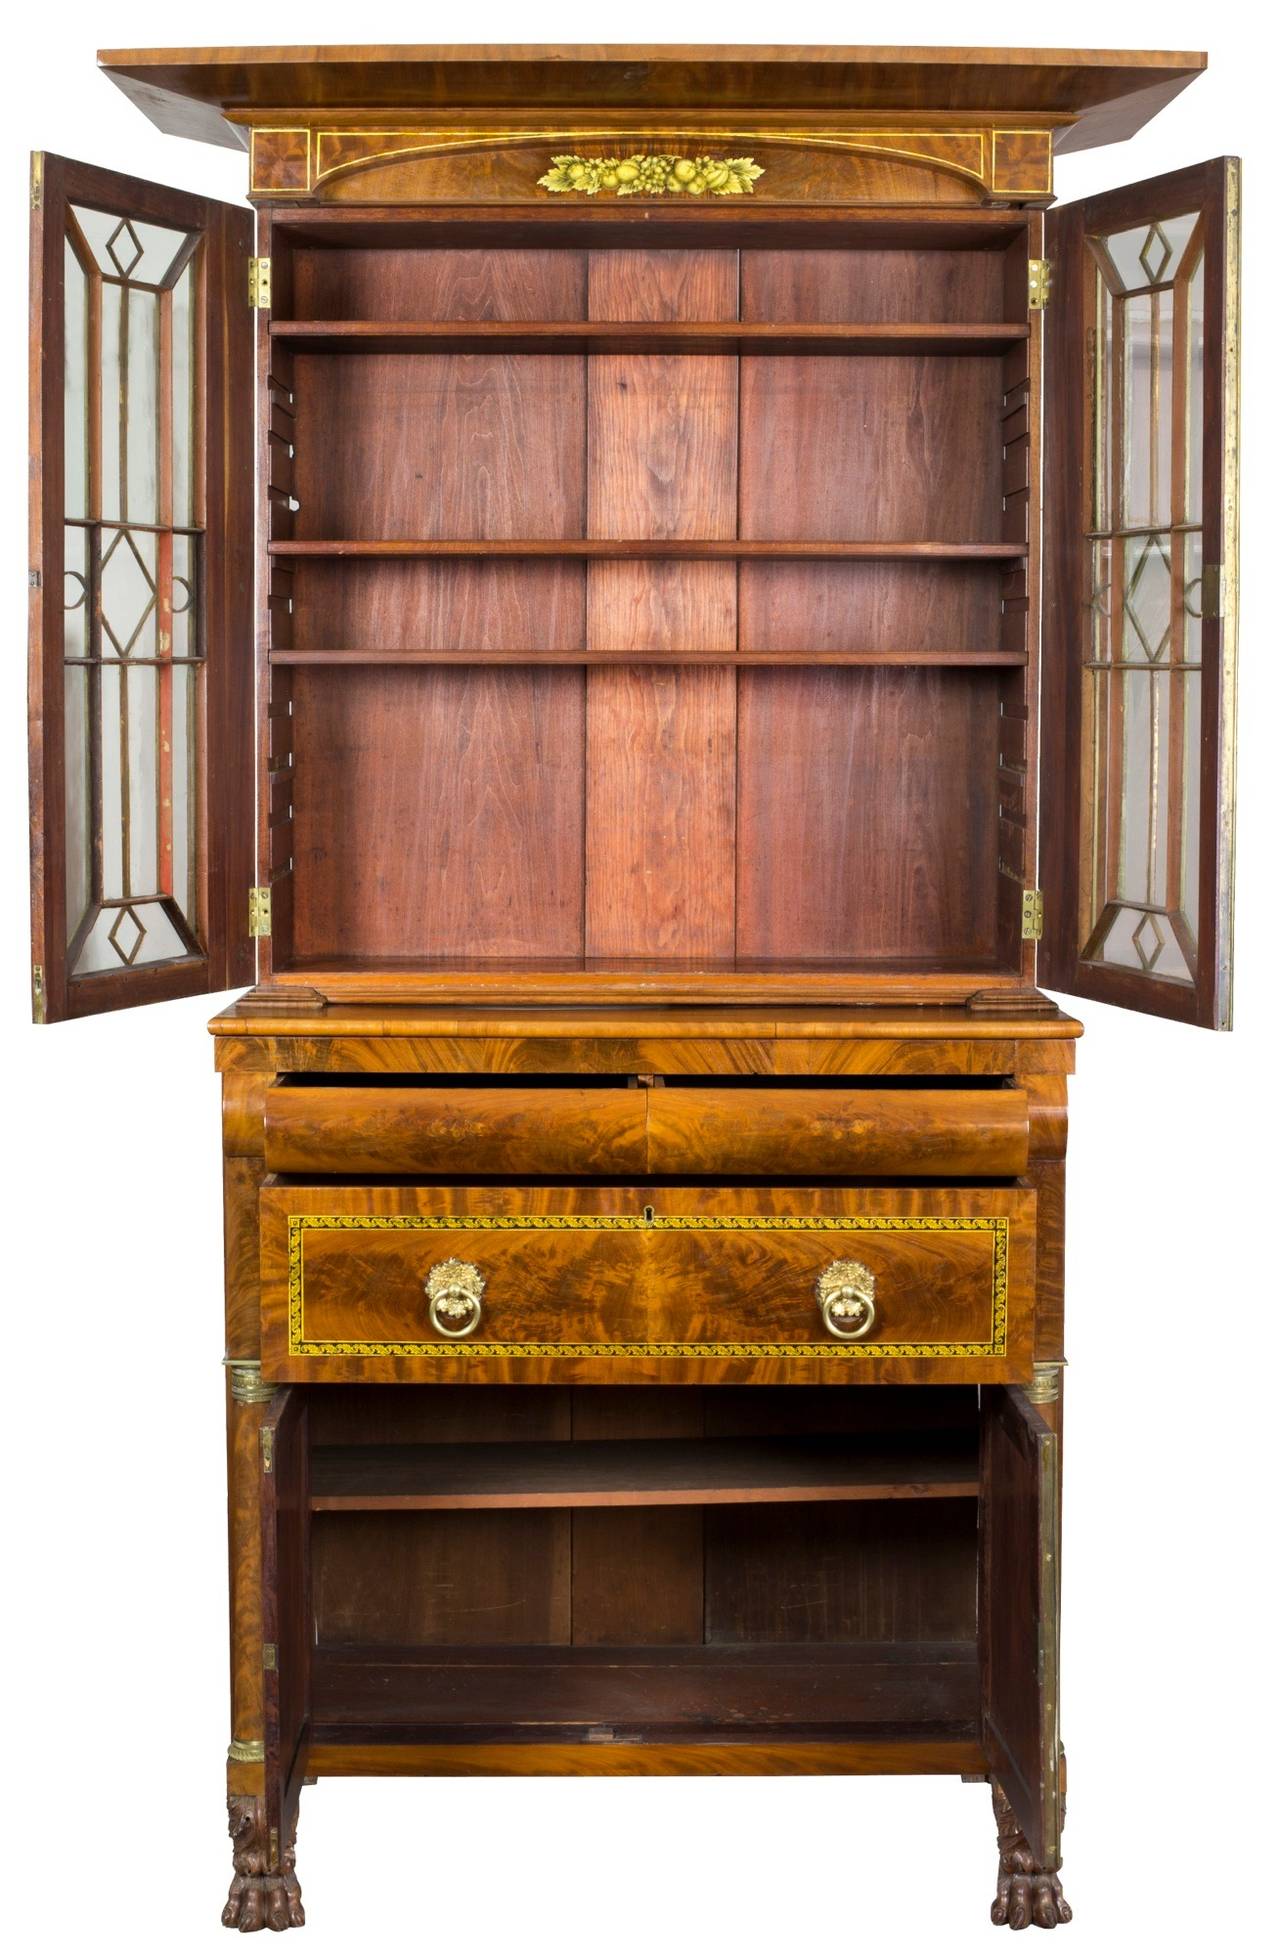 American Classical Monumental Mahogany Bookcase with Drawers, NY, circa 1830